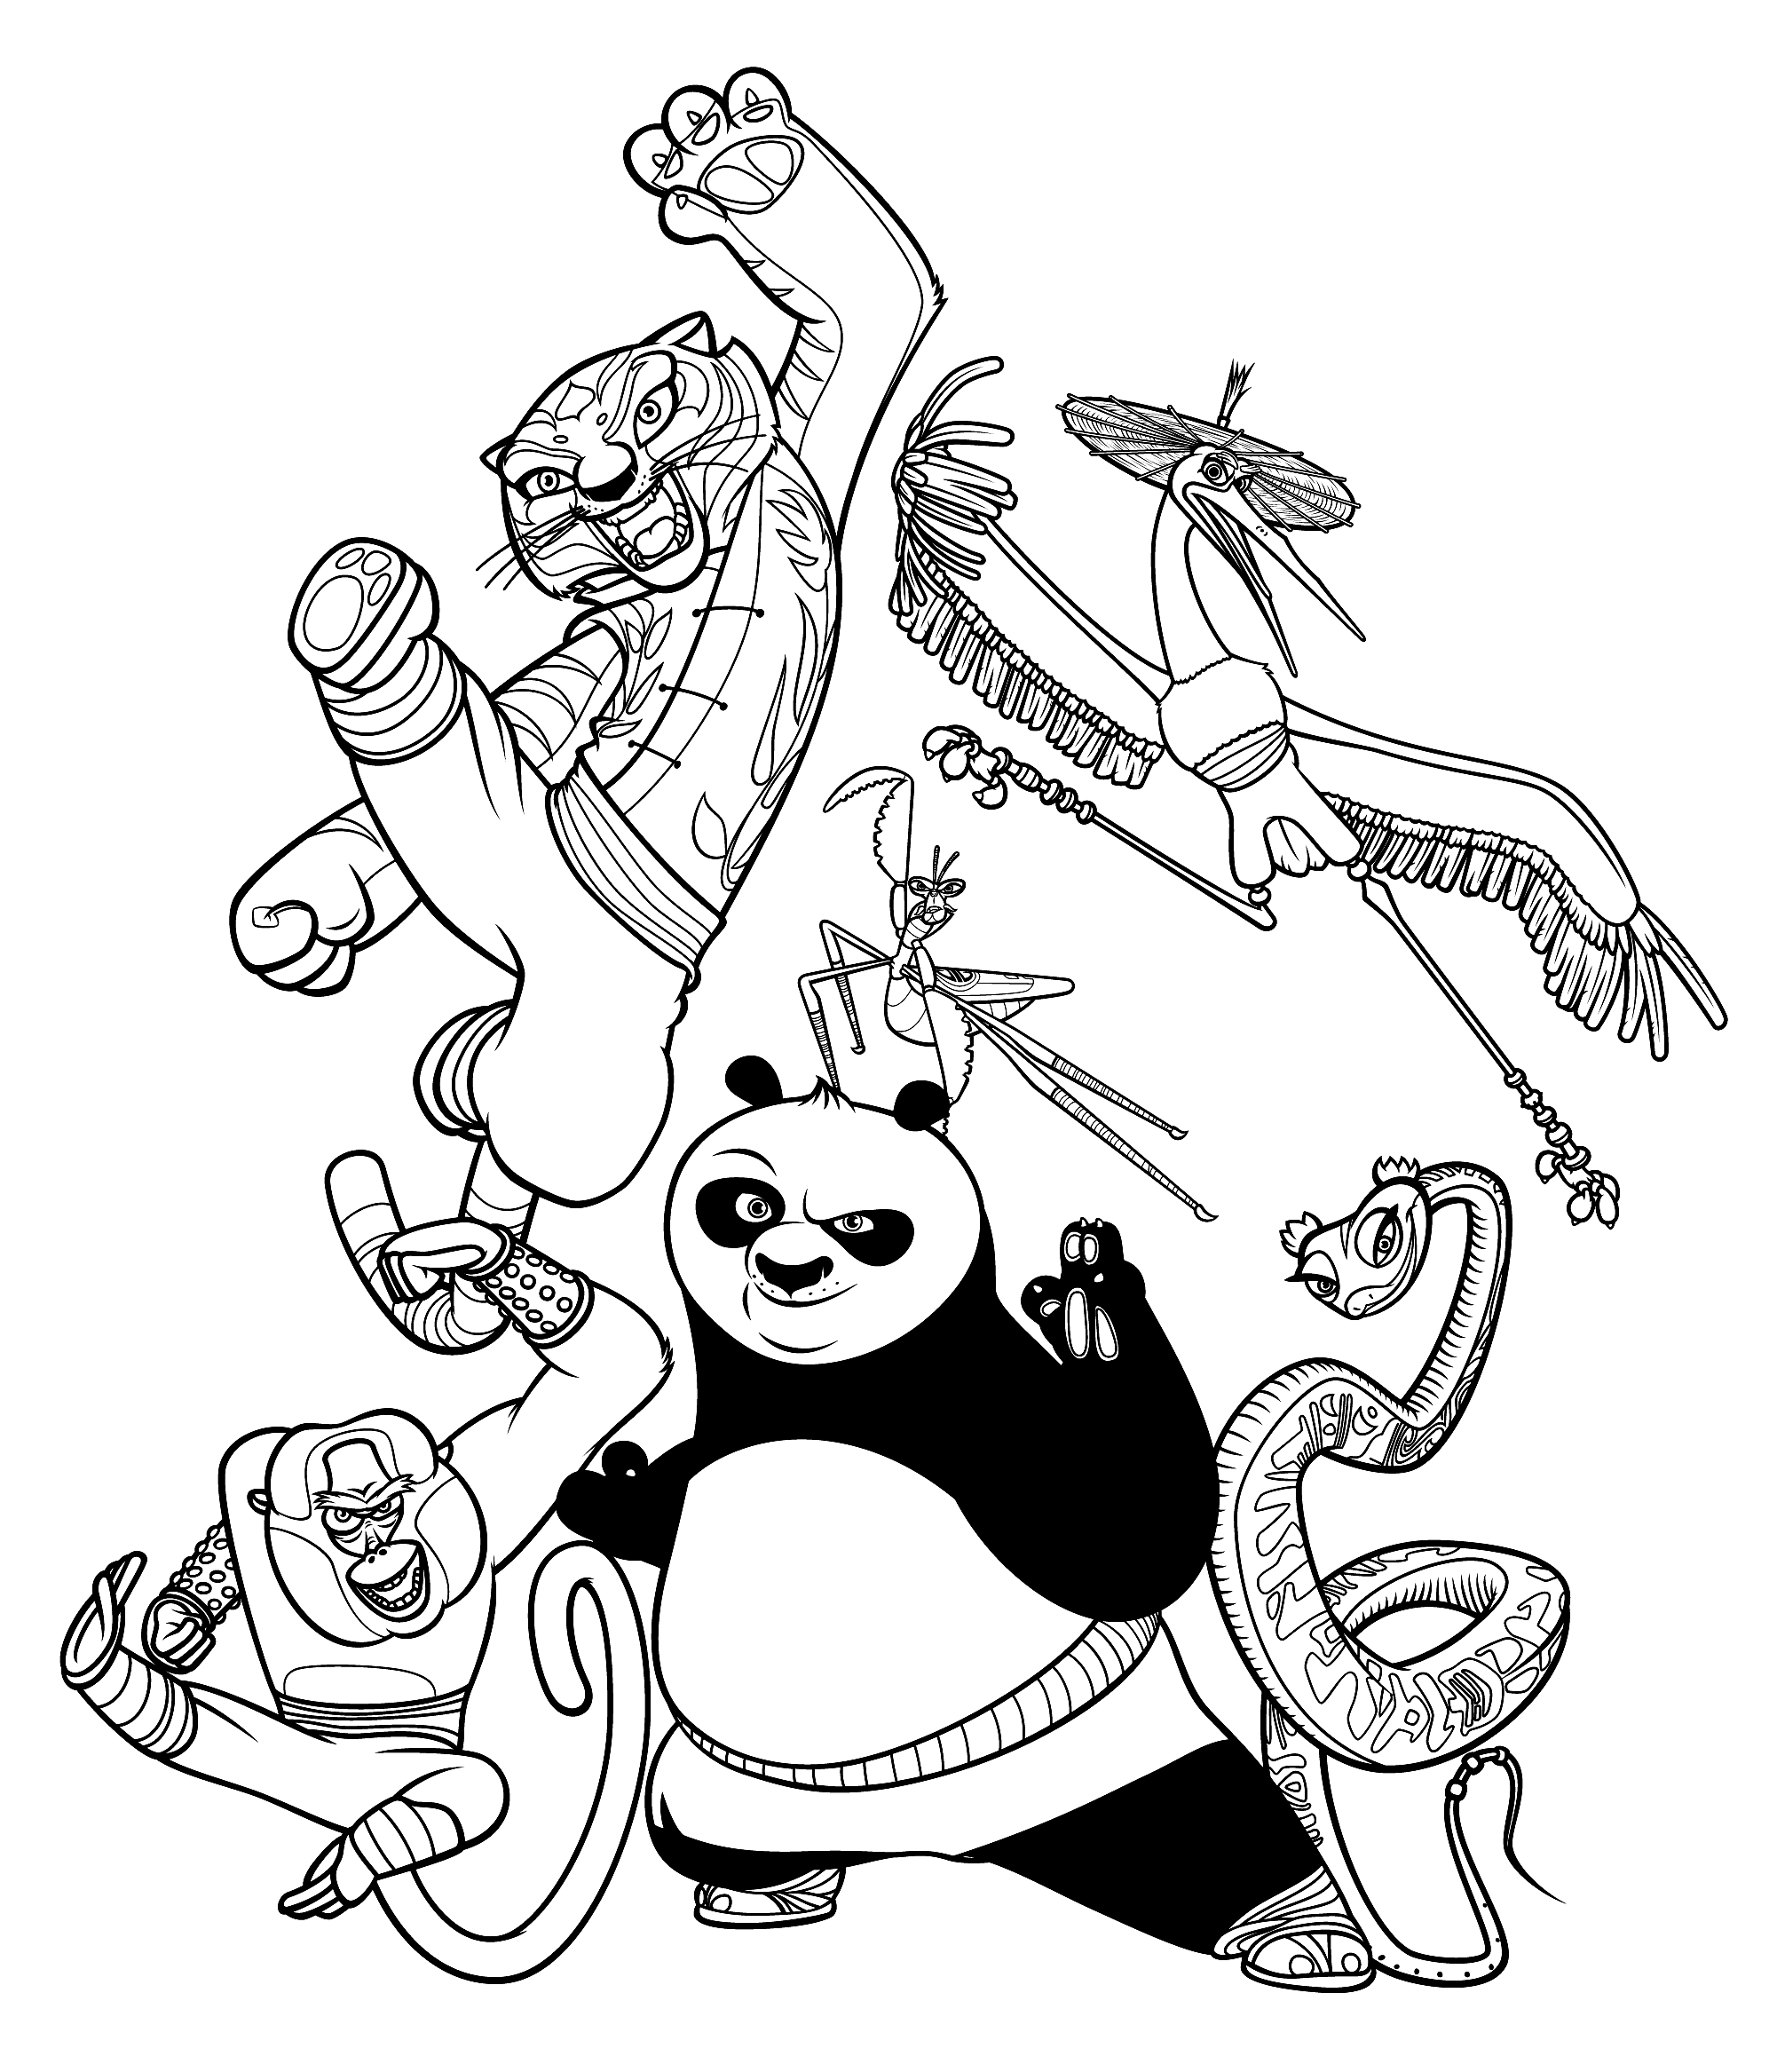 Kung Fu Panda coloring page to print and color for free